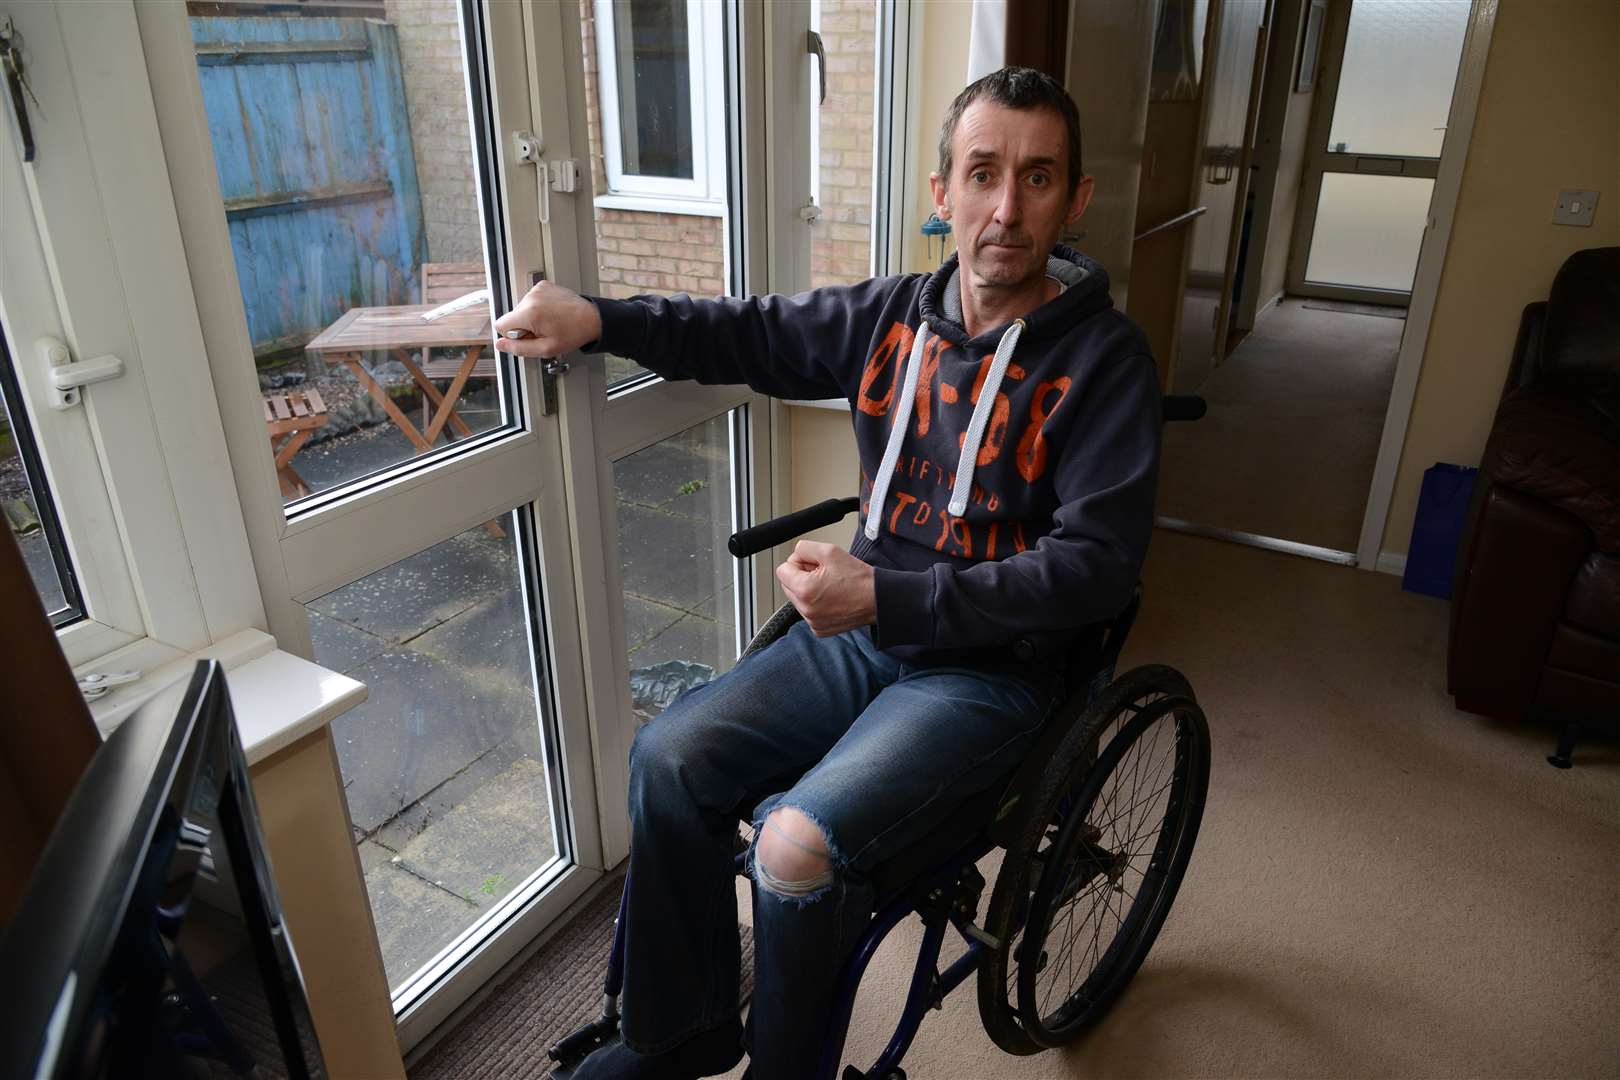 Dan Inwood who has MS and has been told he may have to wait up to two years for adaptations to his house